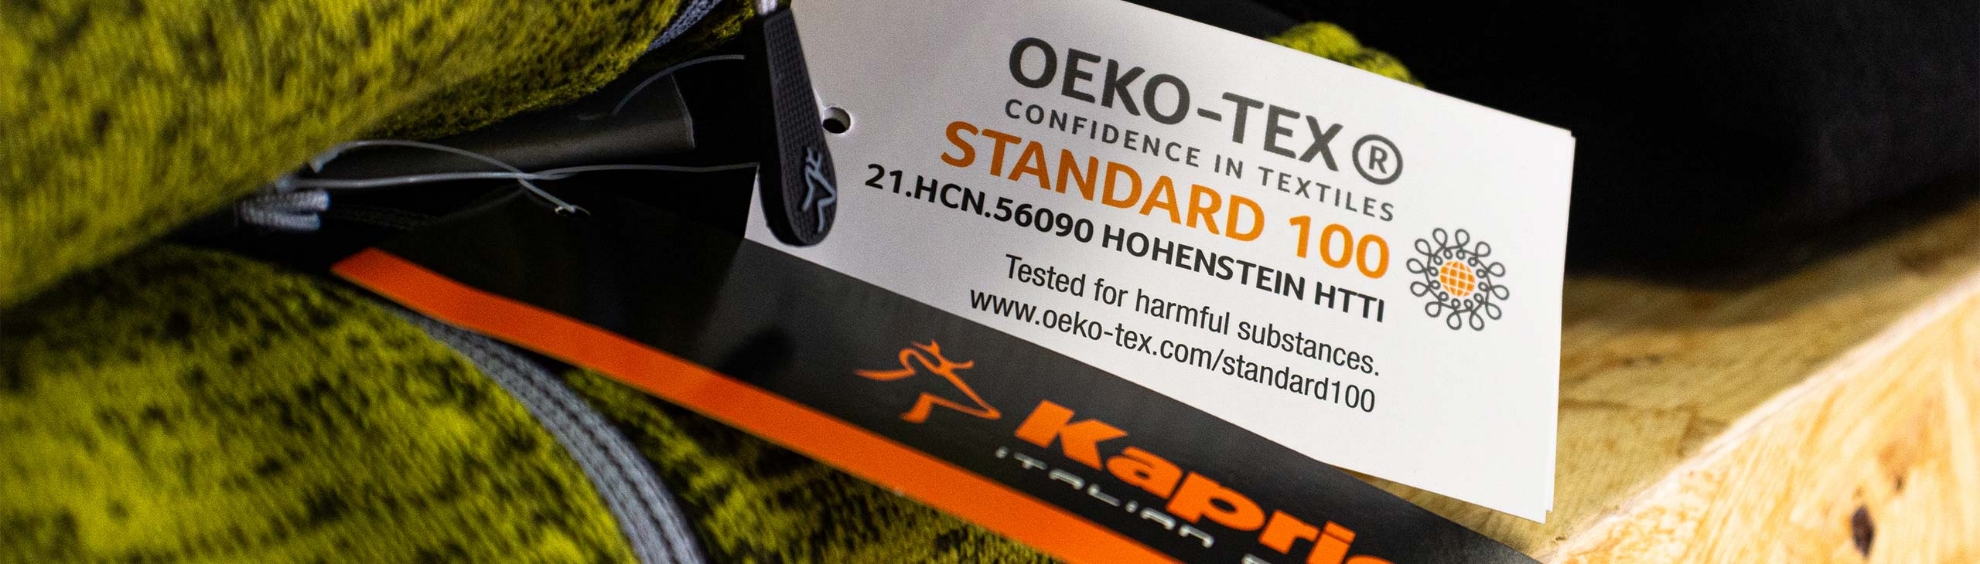 OEKO-TEX: a safety sign on Kapriol clothing